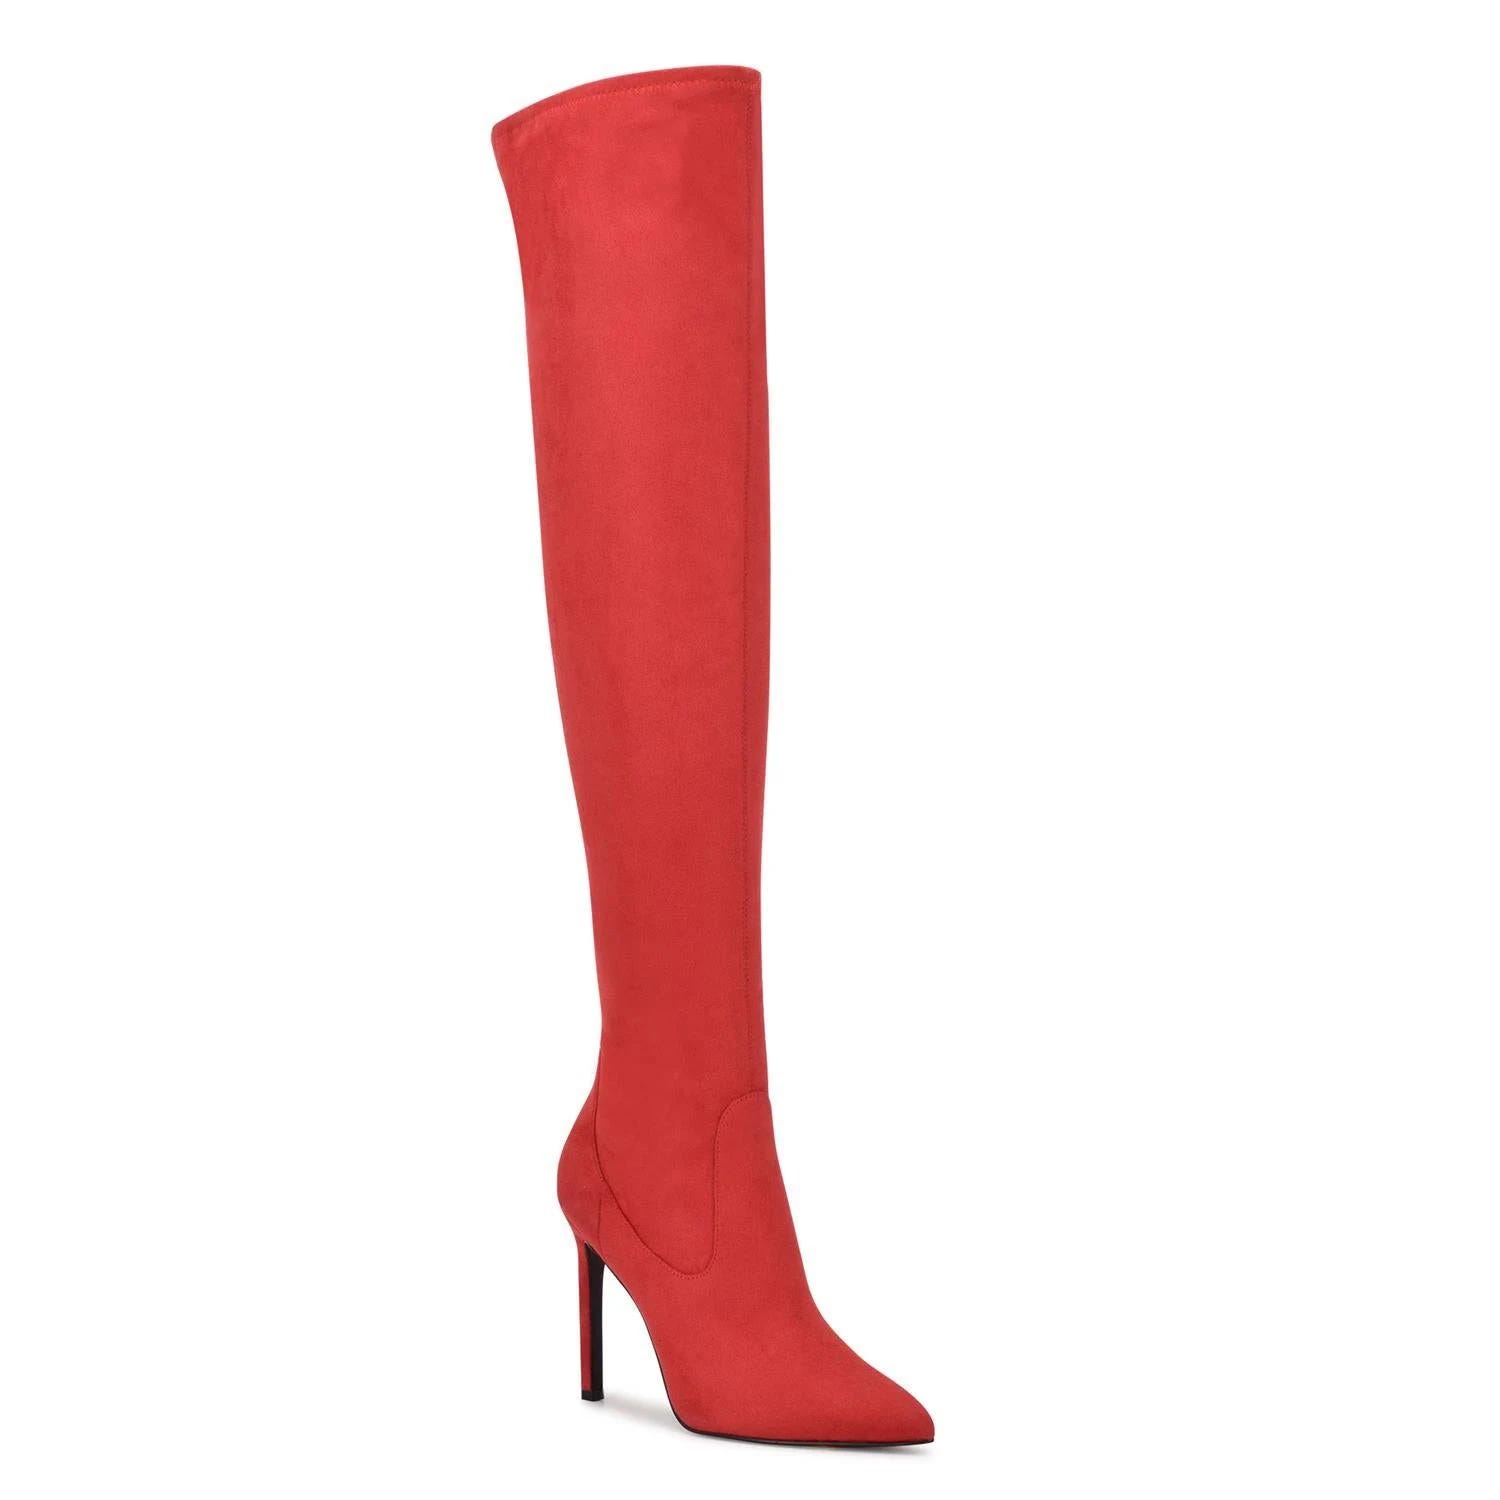 Elegant Red Over the Knee Boots by Nine West | Image